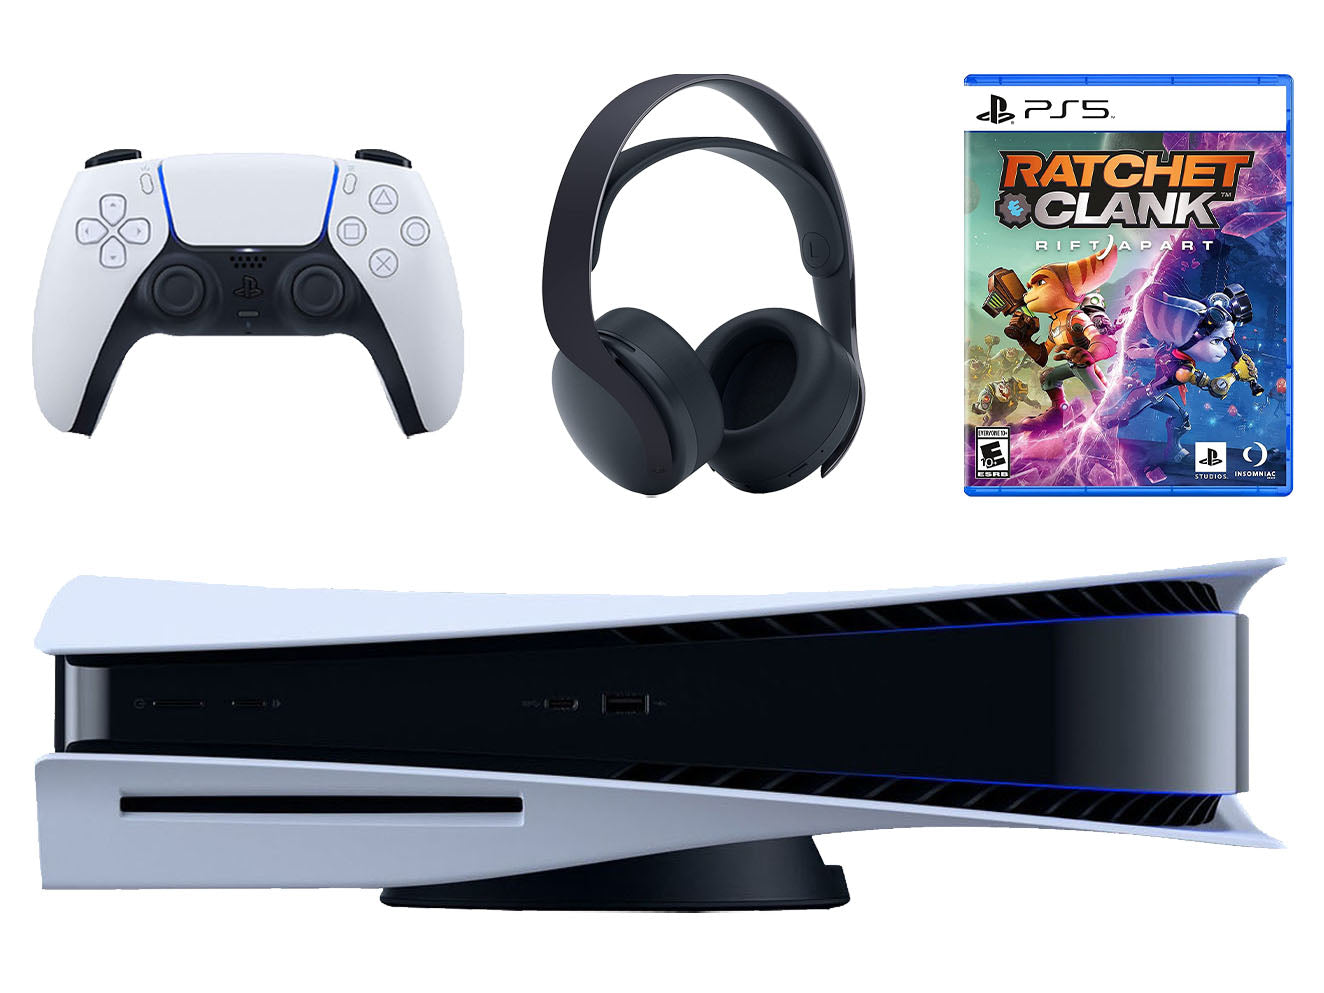 Sony Playstation 5 Disc Version Console with Black PULSE 3D Wireless Gaming Headset and Ratchet & Clank: Rift Apart - Pro-Distributing